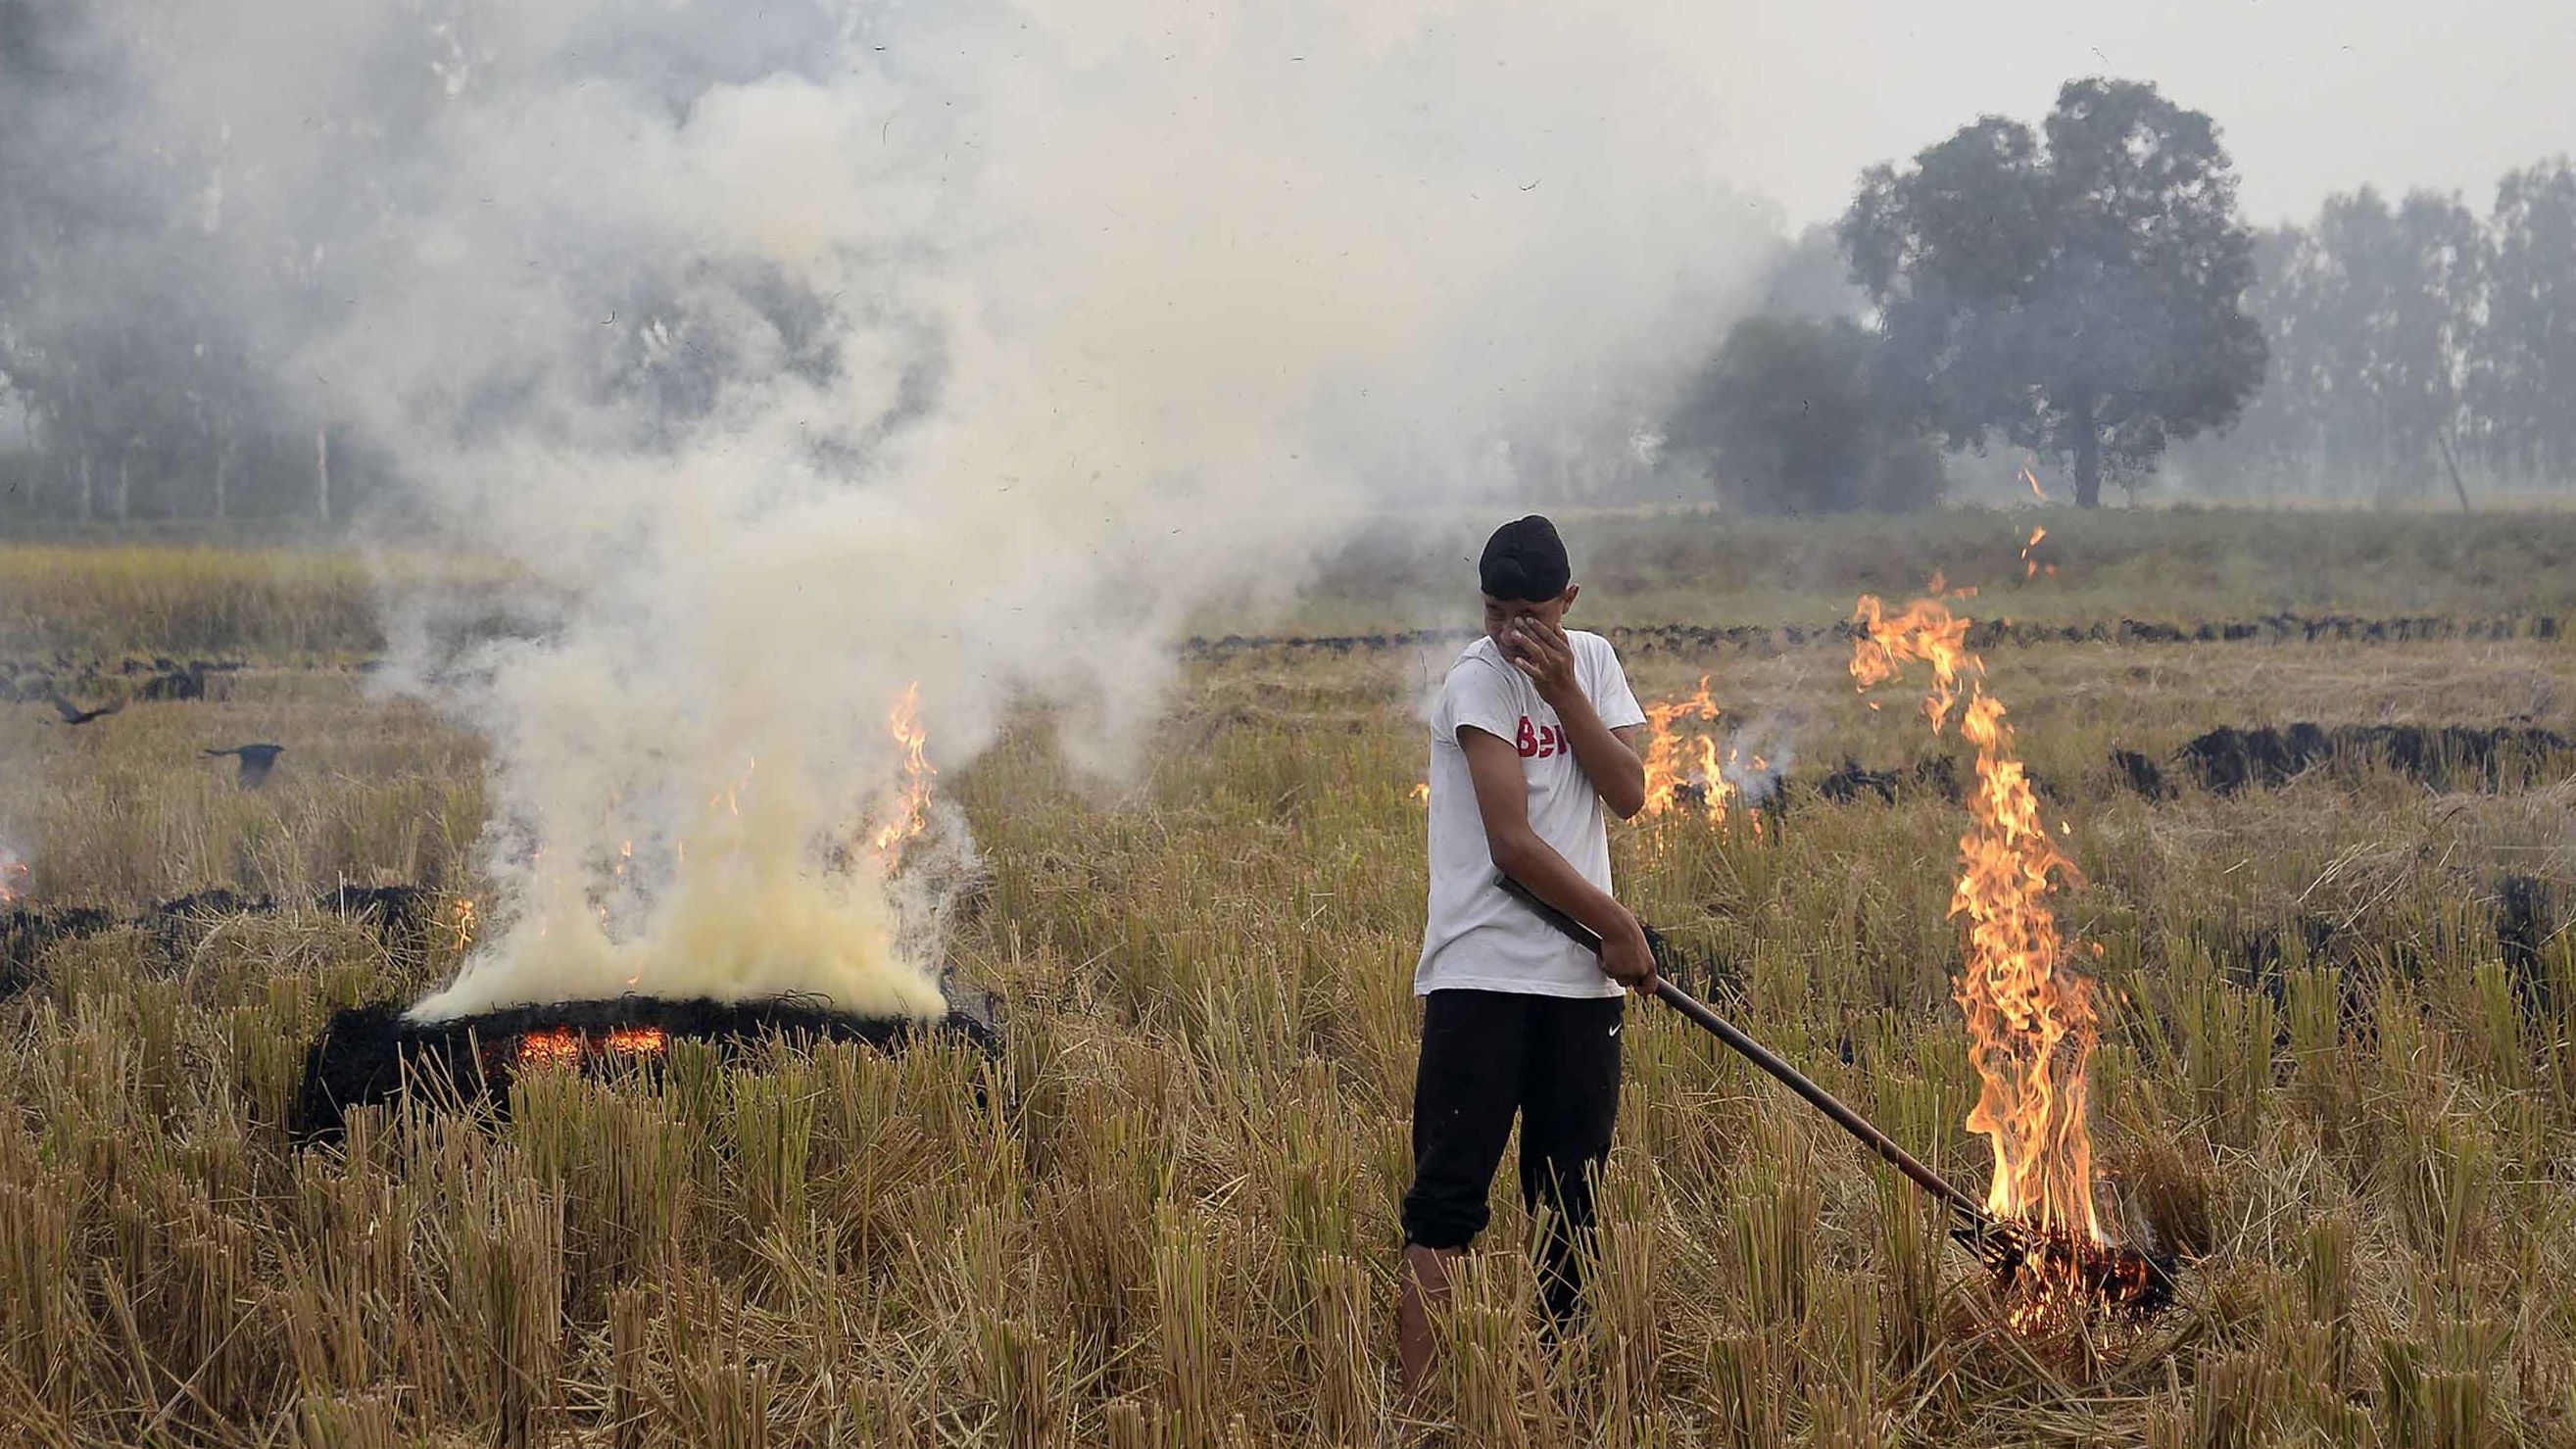 An Indian farmer burns paddy stubble in a field on the outskirts of Jalandhar. Cooler winter air traps particulates close to the ground, preventing them from dispersing.